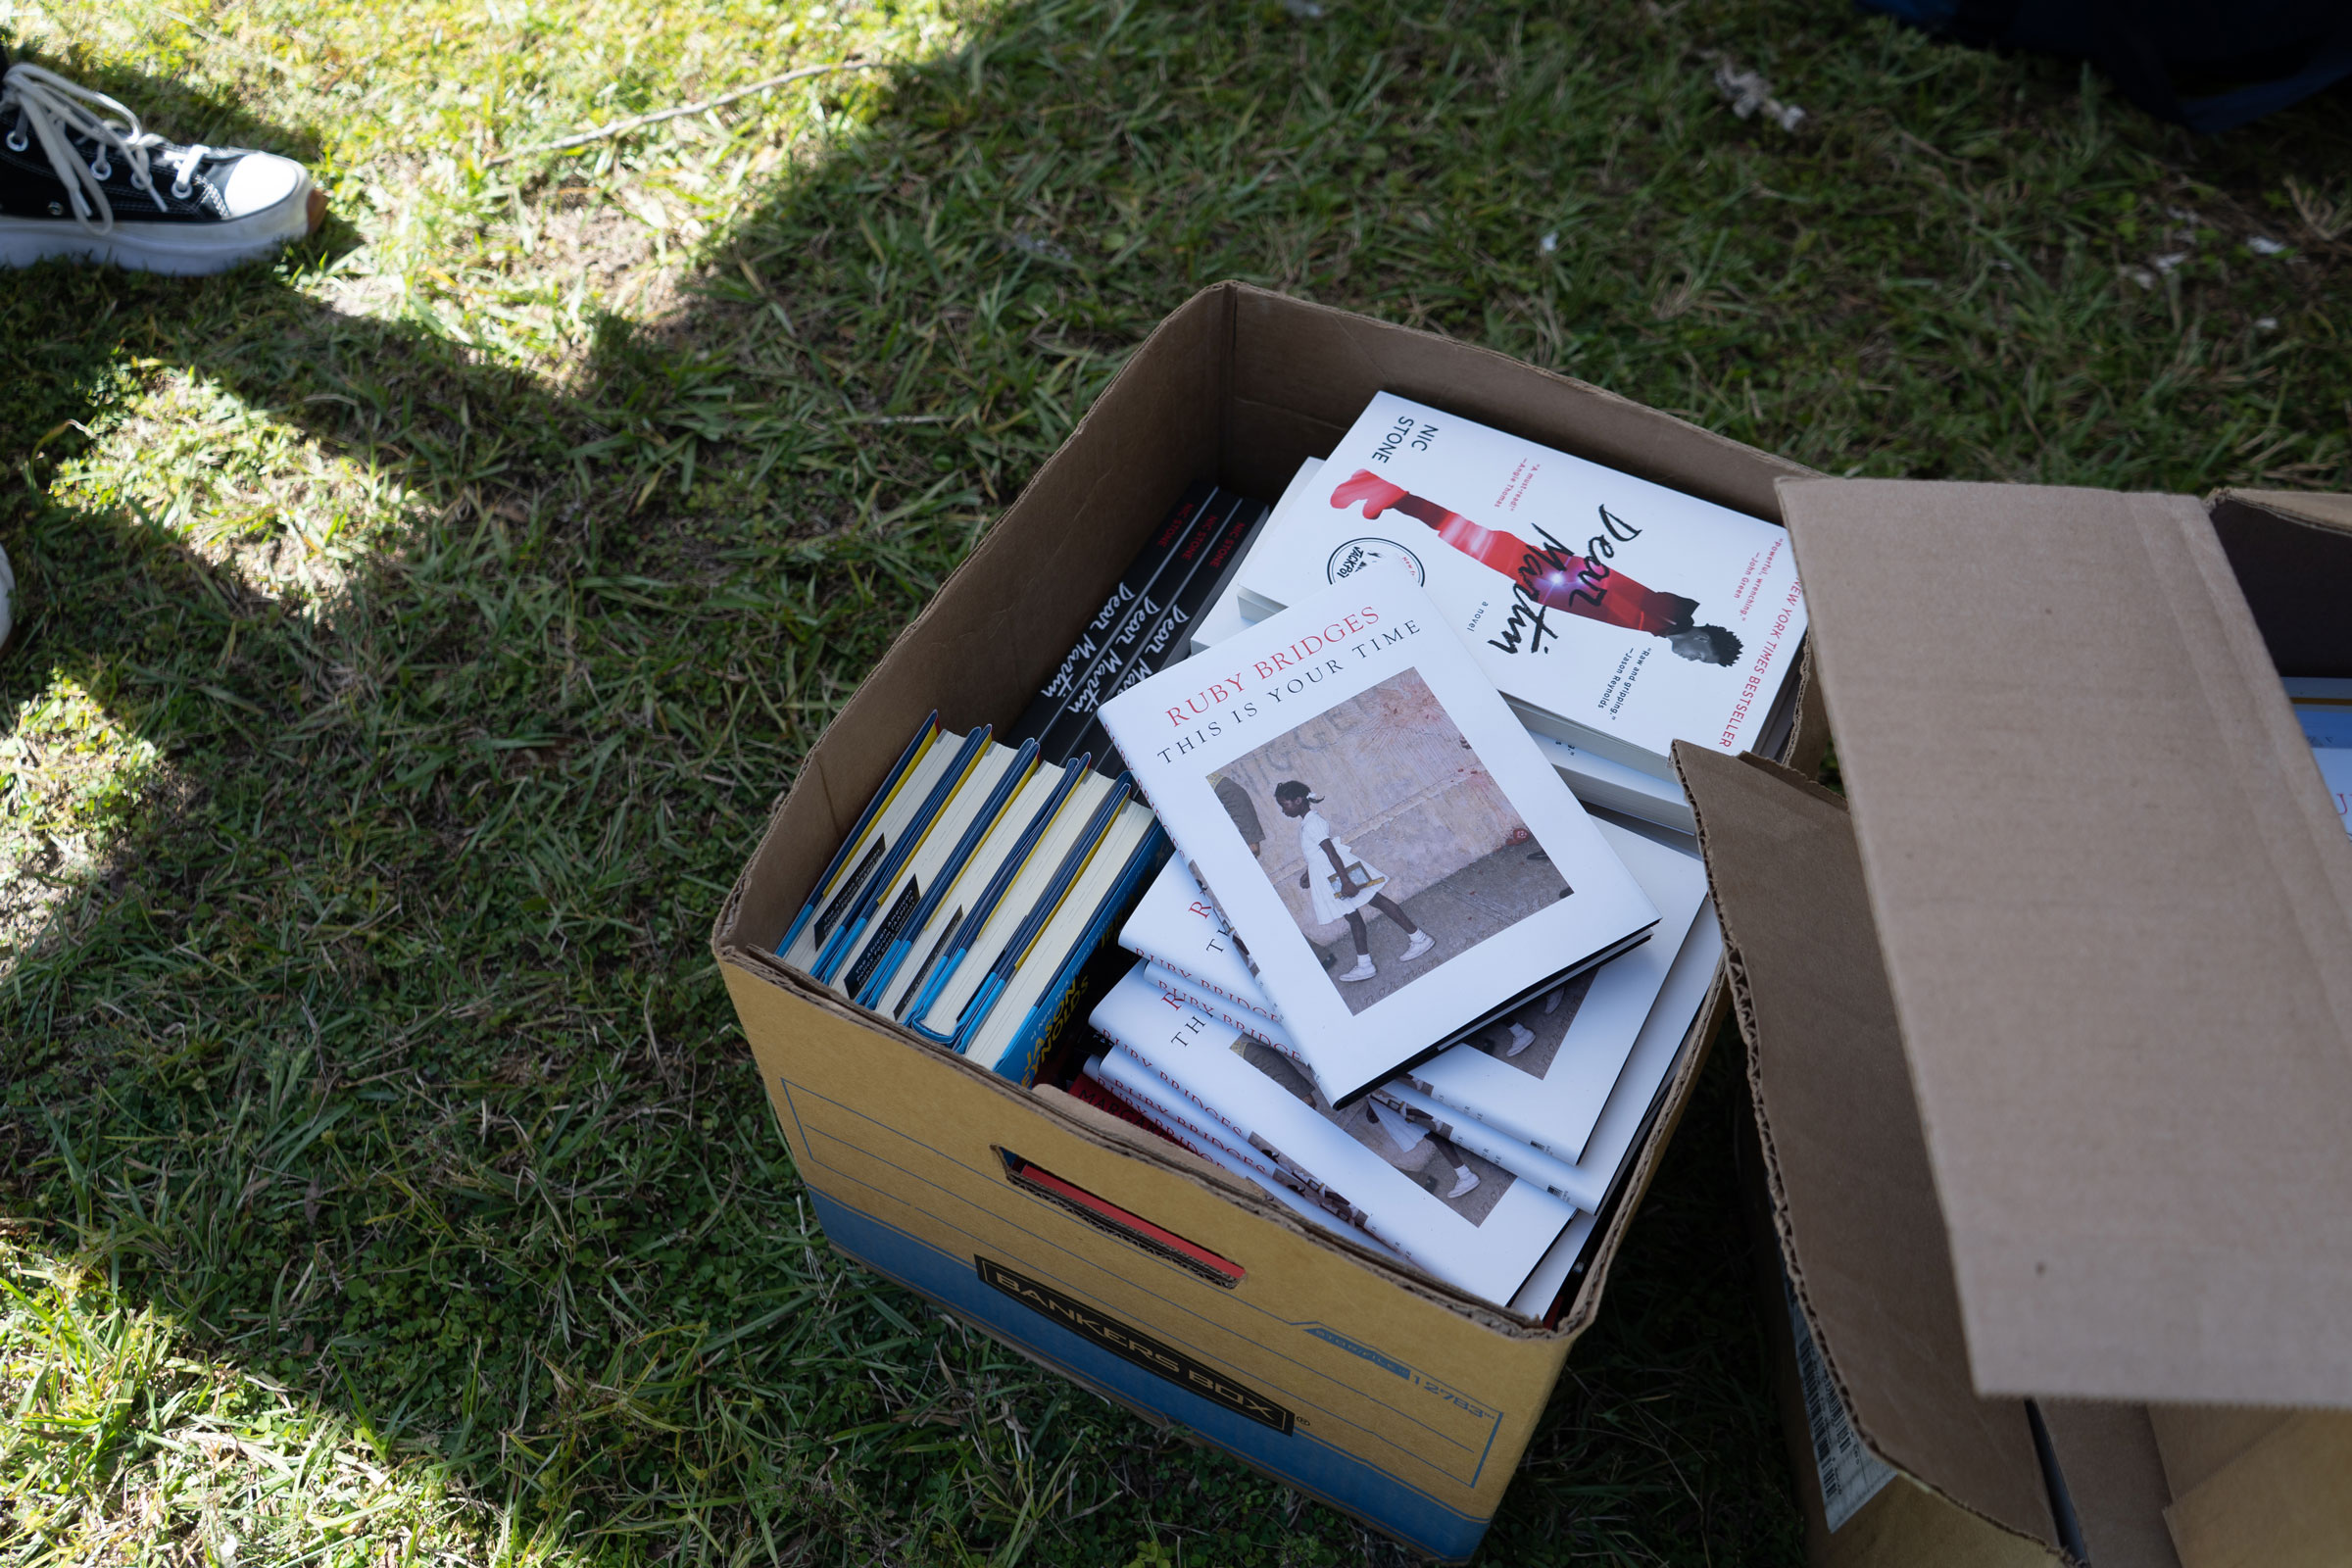 The banned books distributed in Jacksonville included <em>This is Your Time</em> by Ruby Bridges. (Malcolm Jackson for TIME)